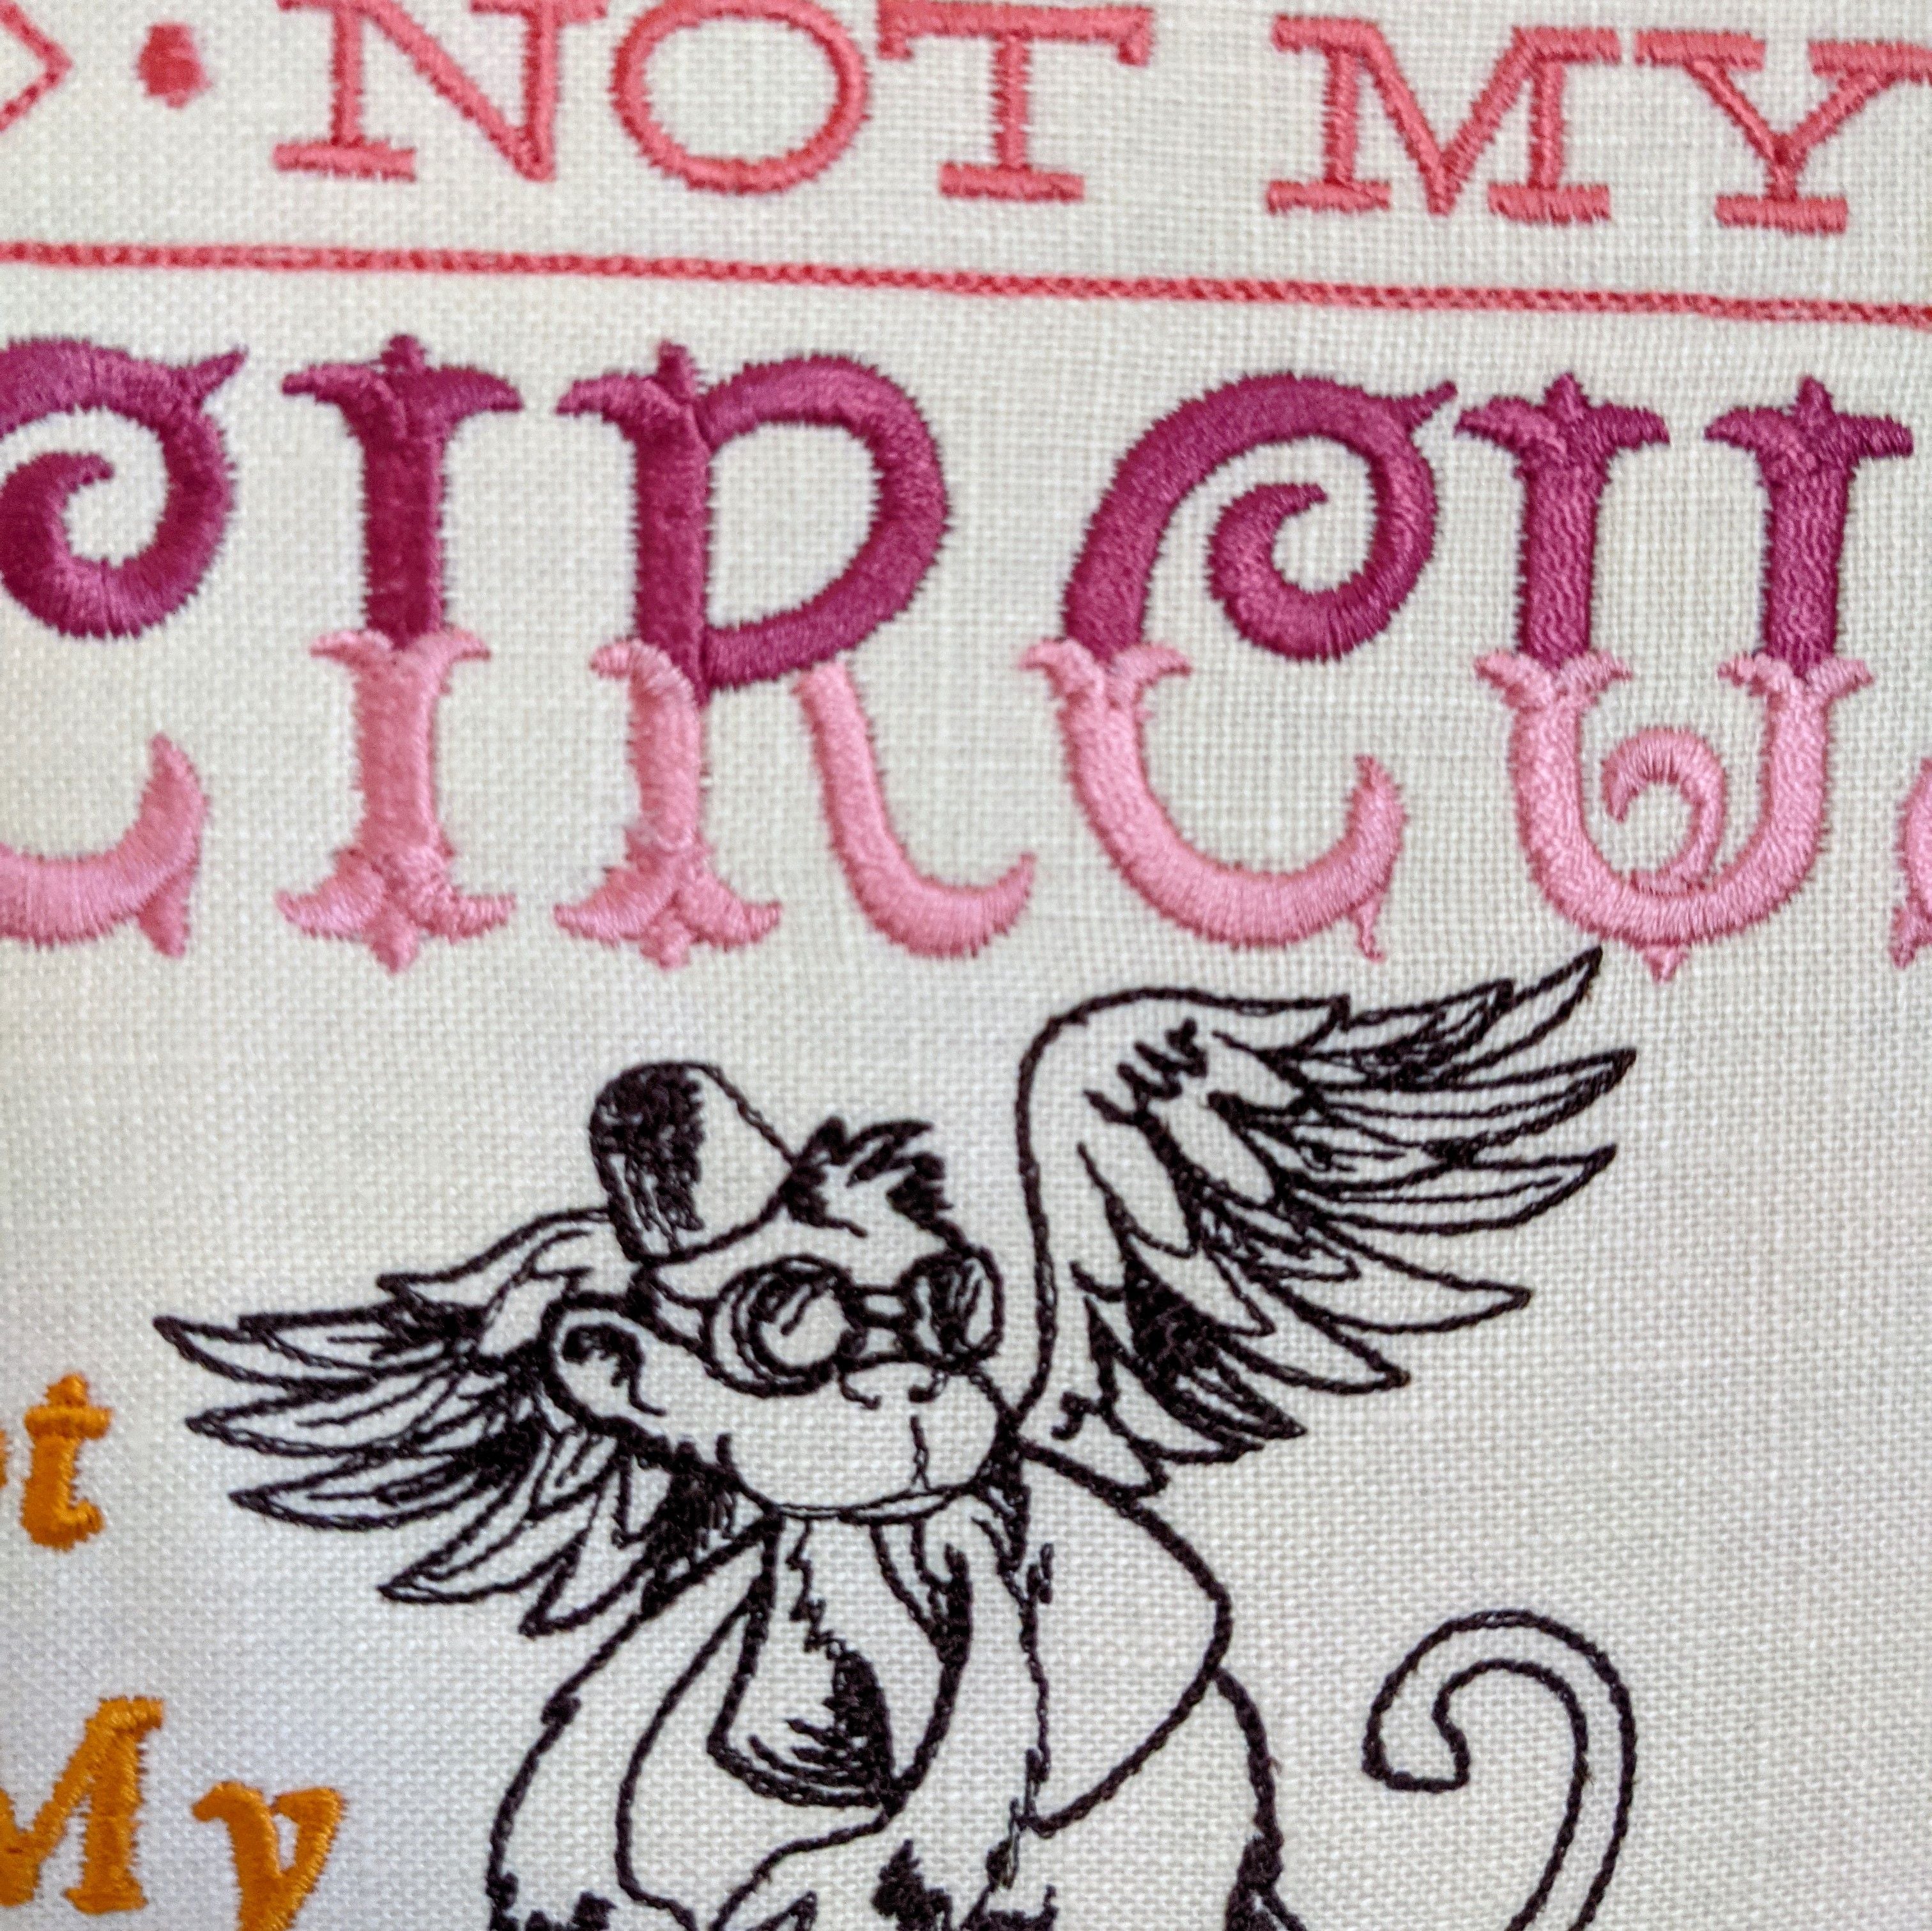 Not my circus, not my monkeys, Machine embroidery 8" hoop,